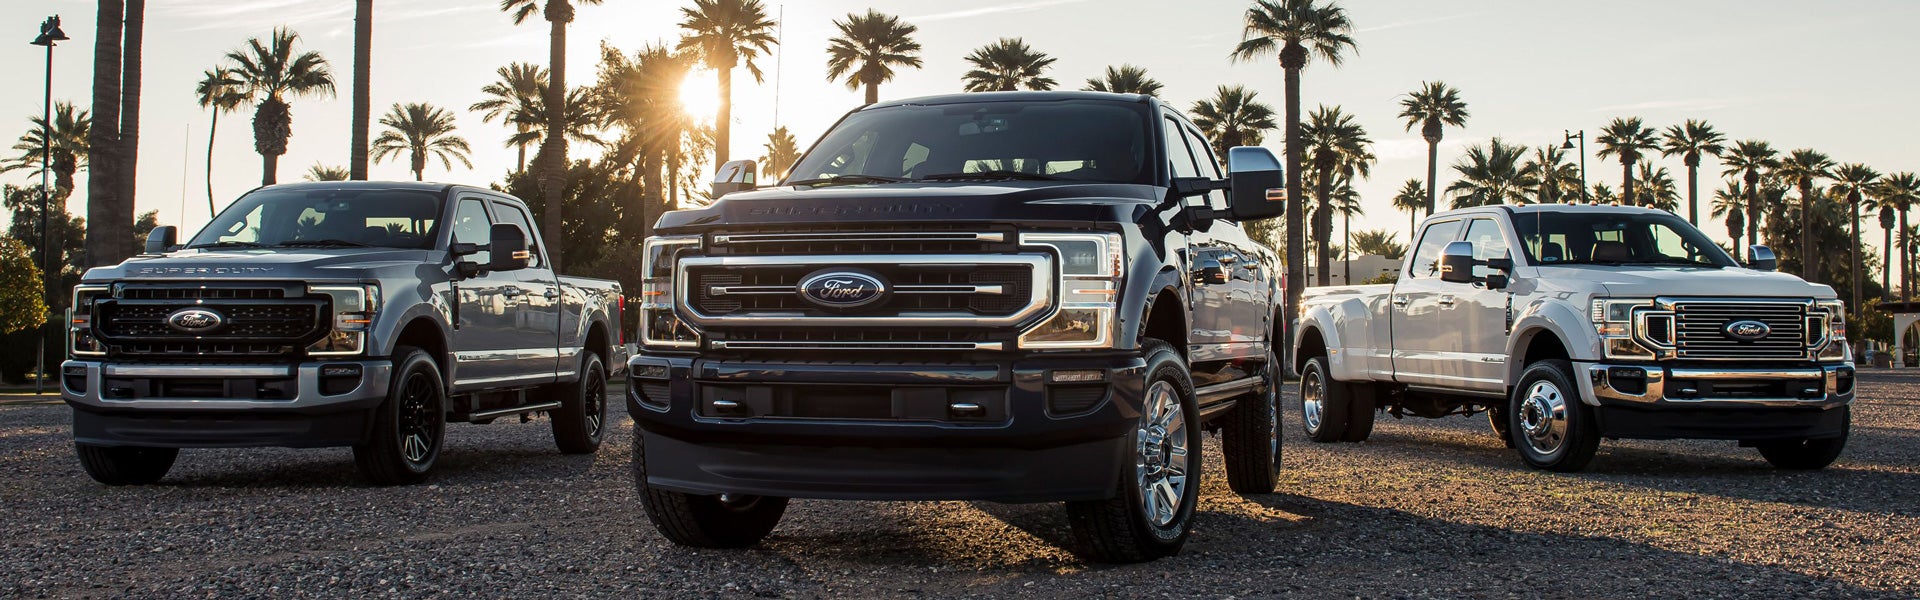 New 2021 Ford F-150 For Sale